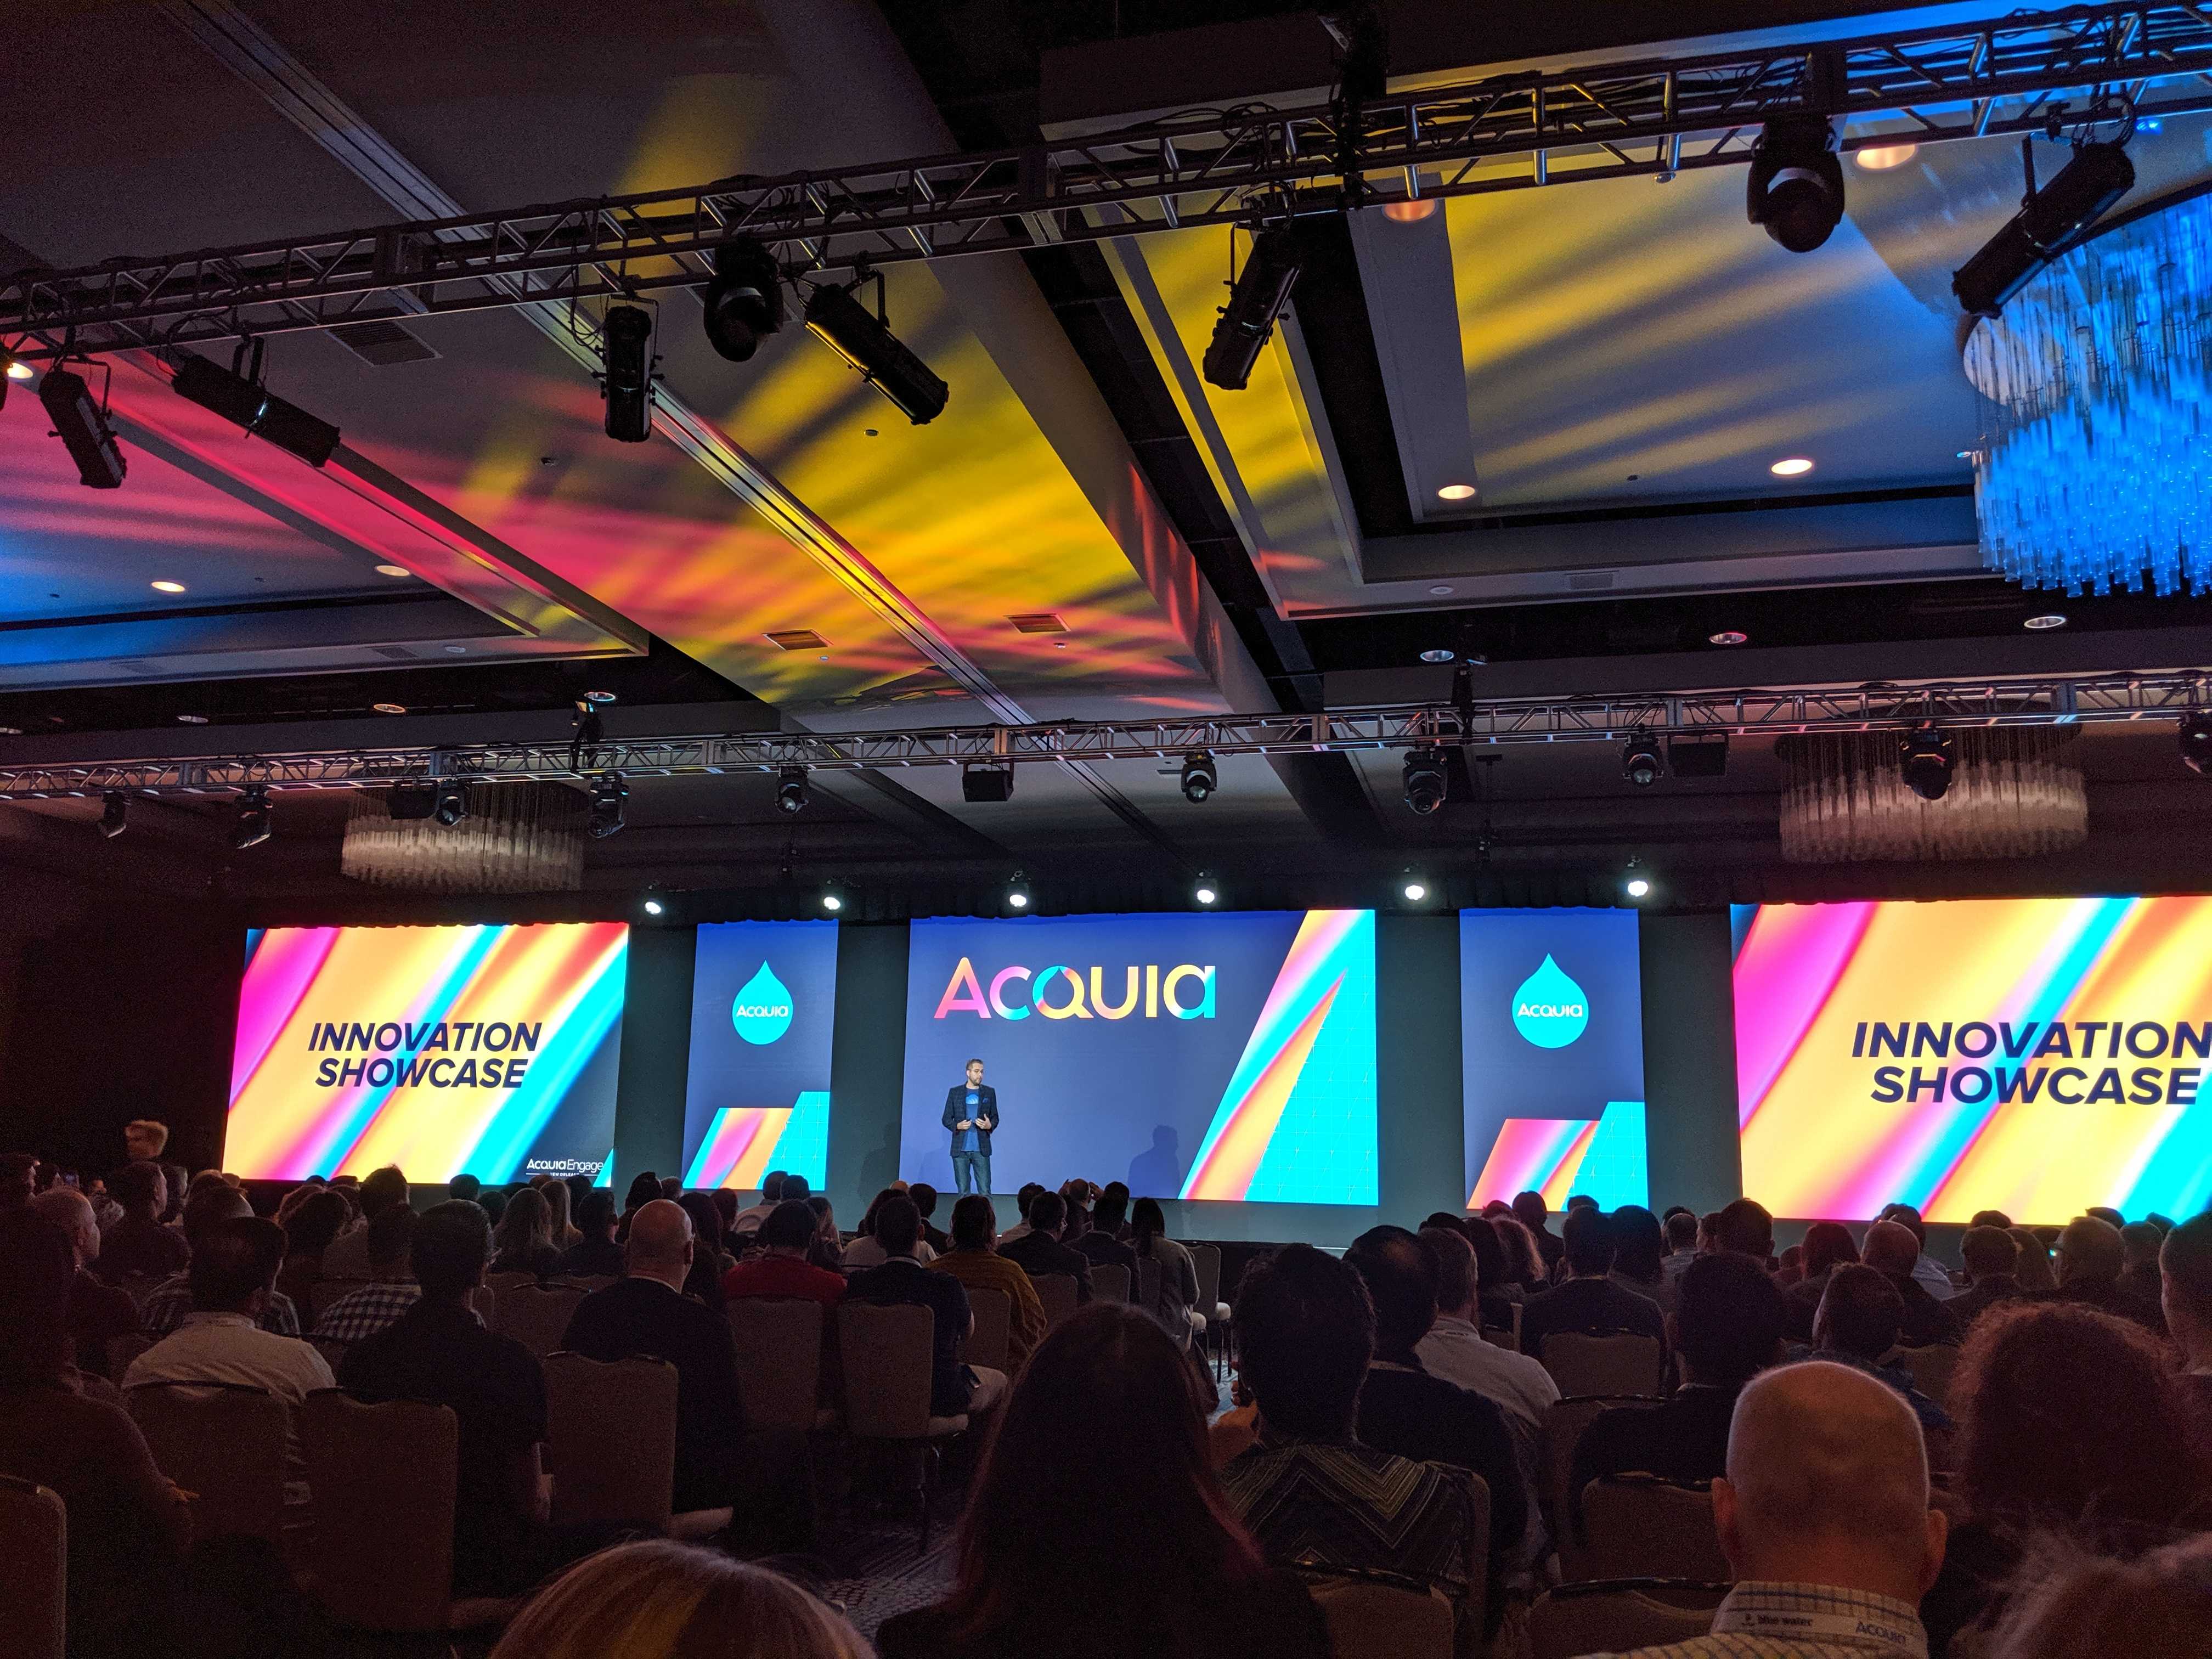 person standing on stage with screens in background, says Acquia Innovation Showcase